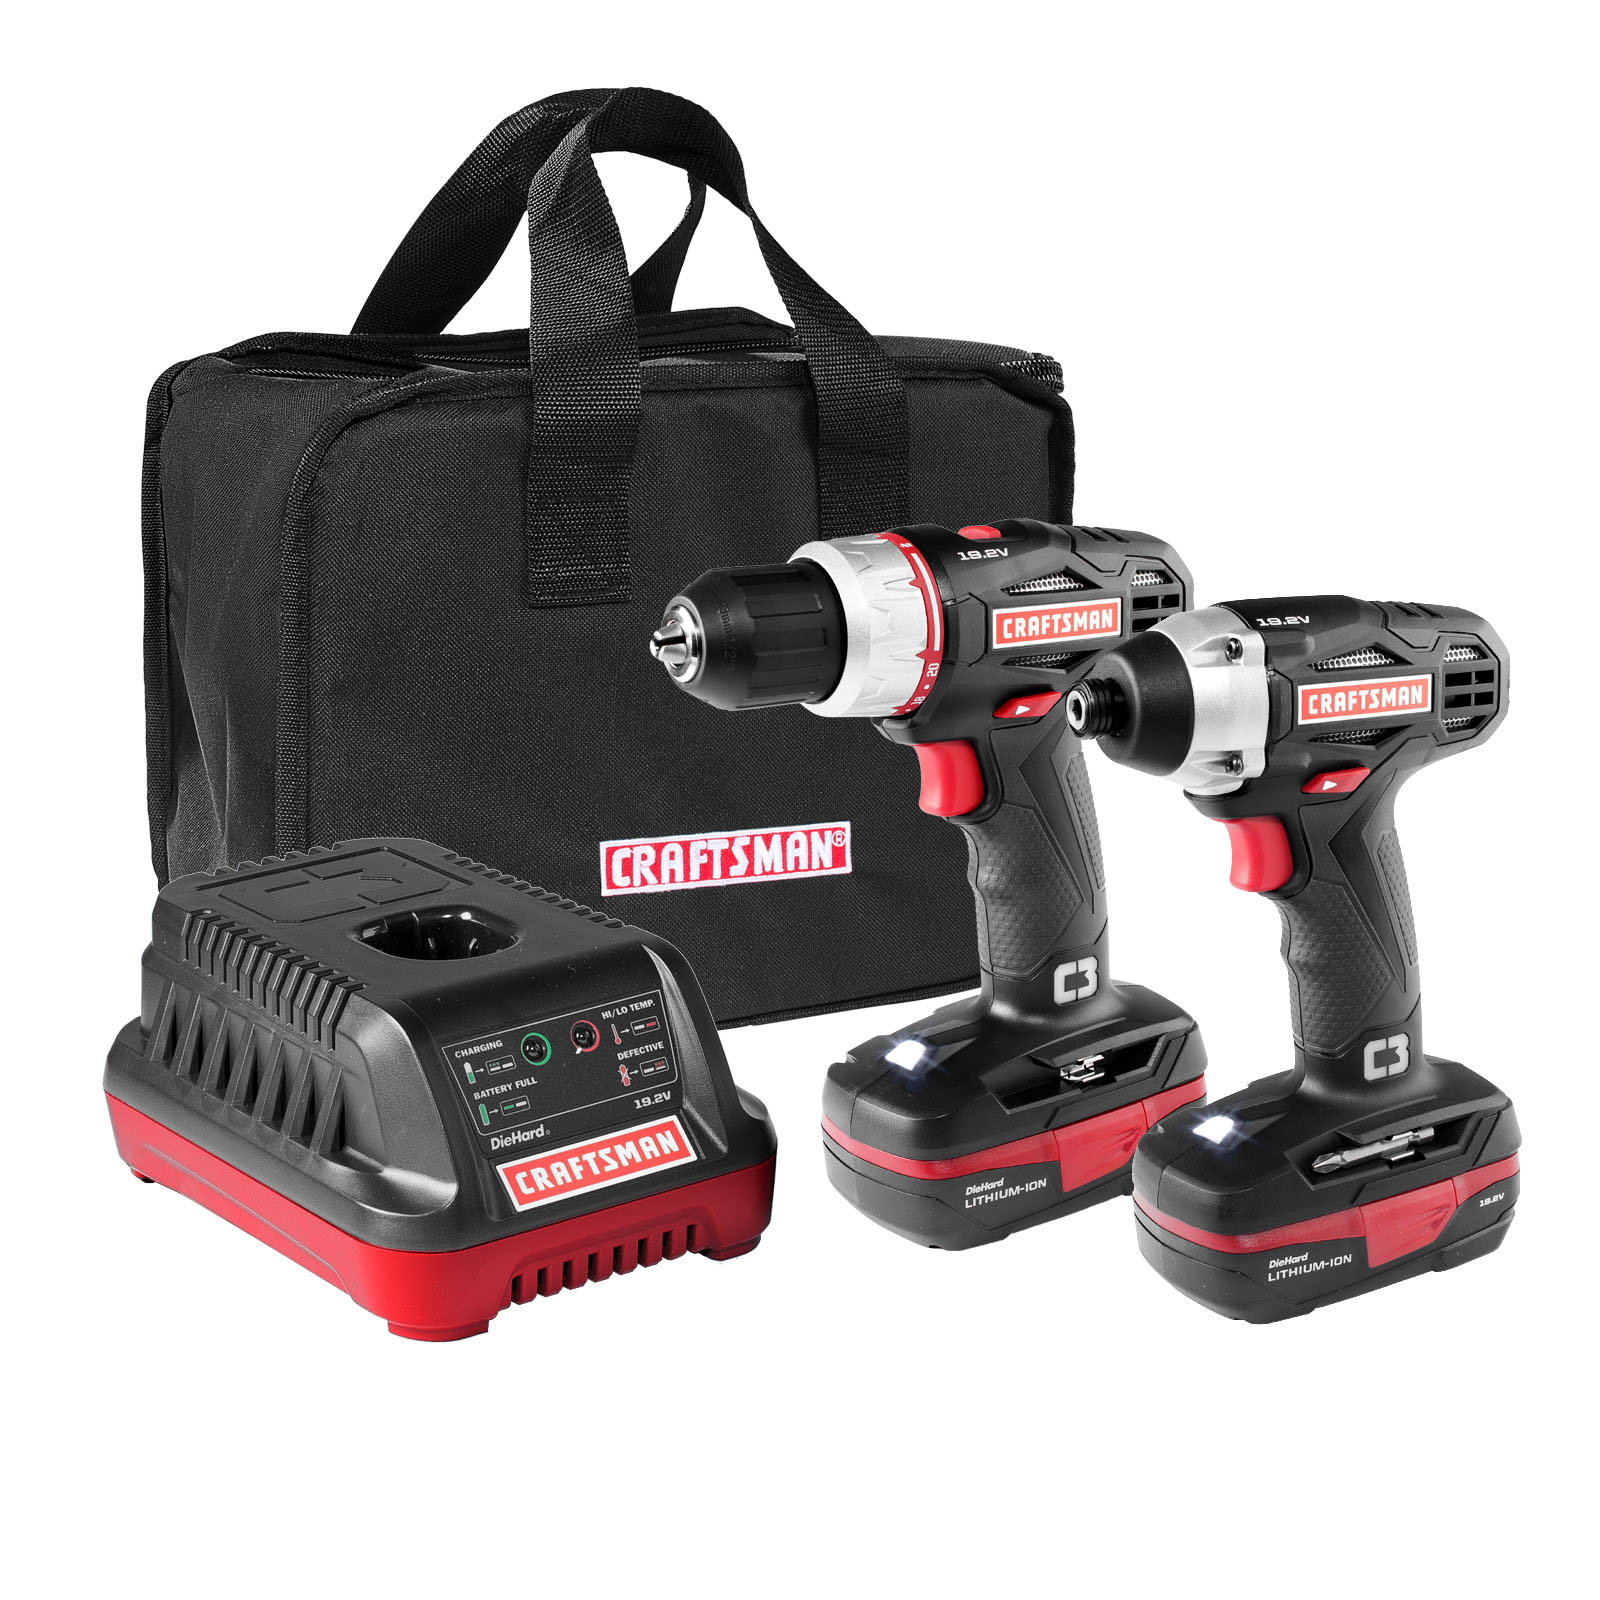 0692042004186 - C3 19.2 VOLT DRILL AND IMPACT DRIVER COMBO KIT